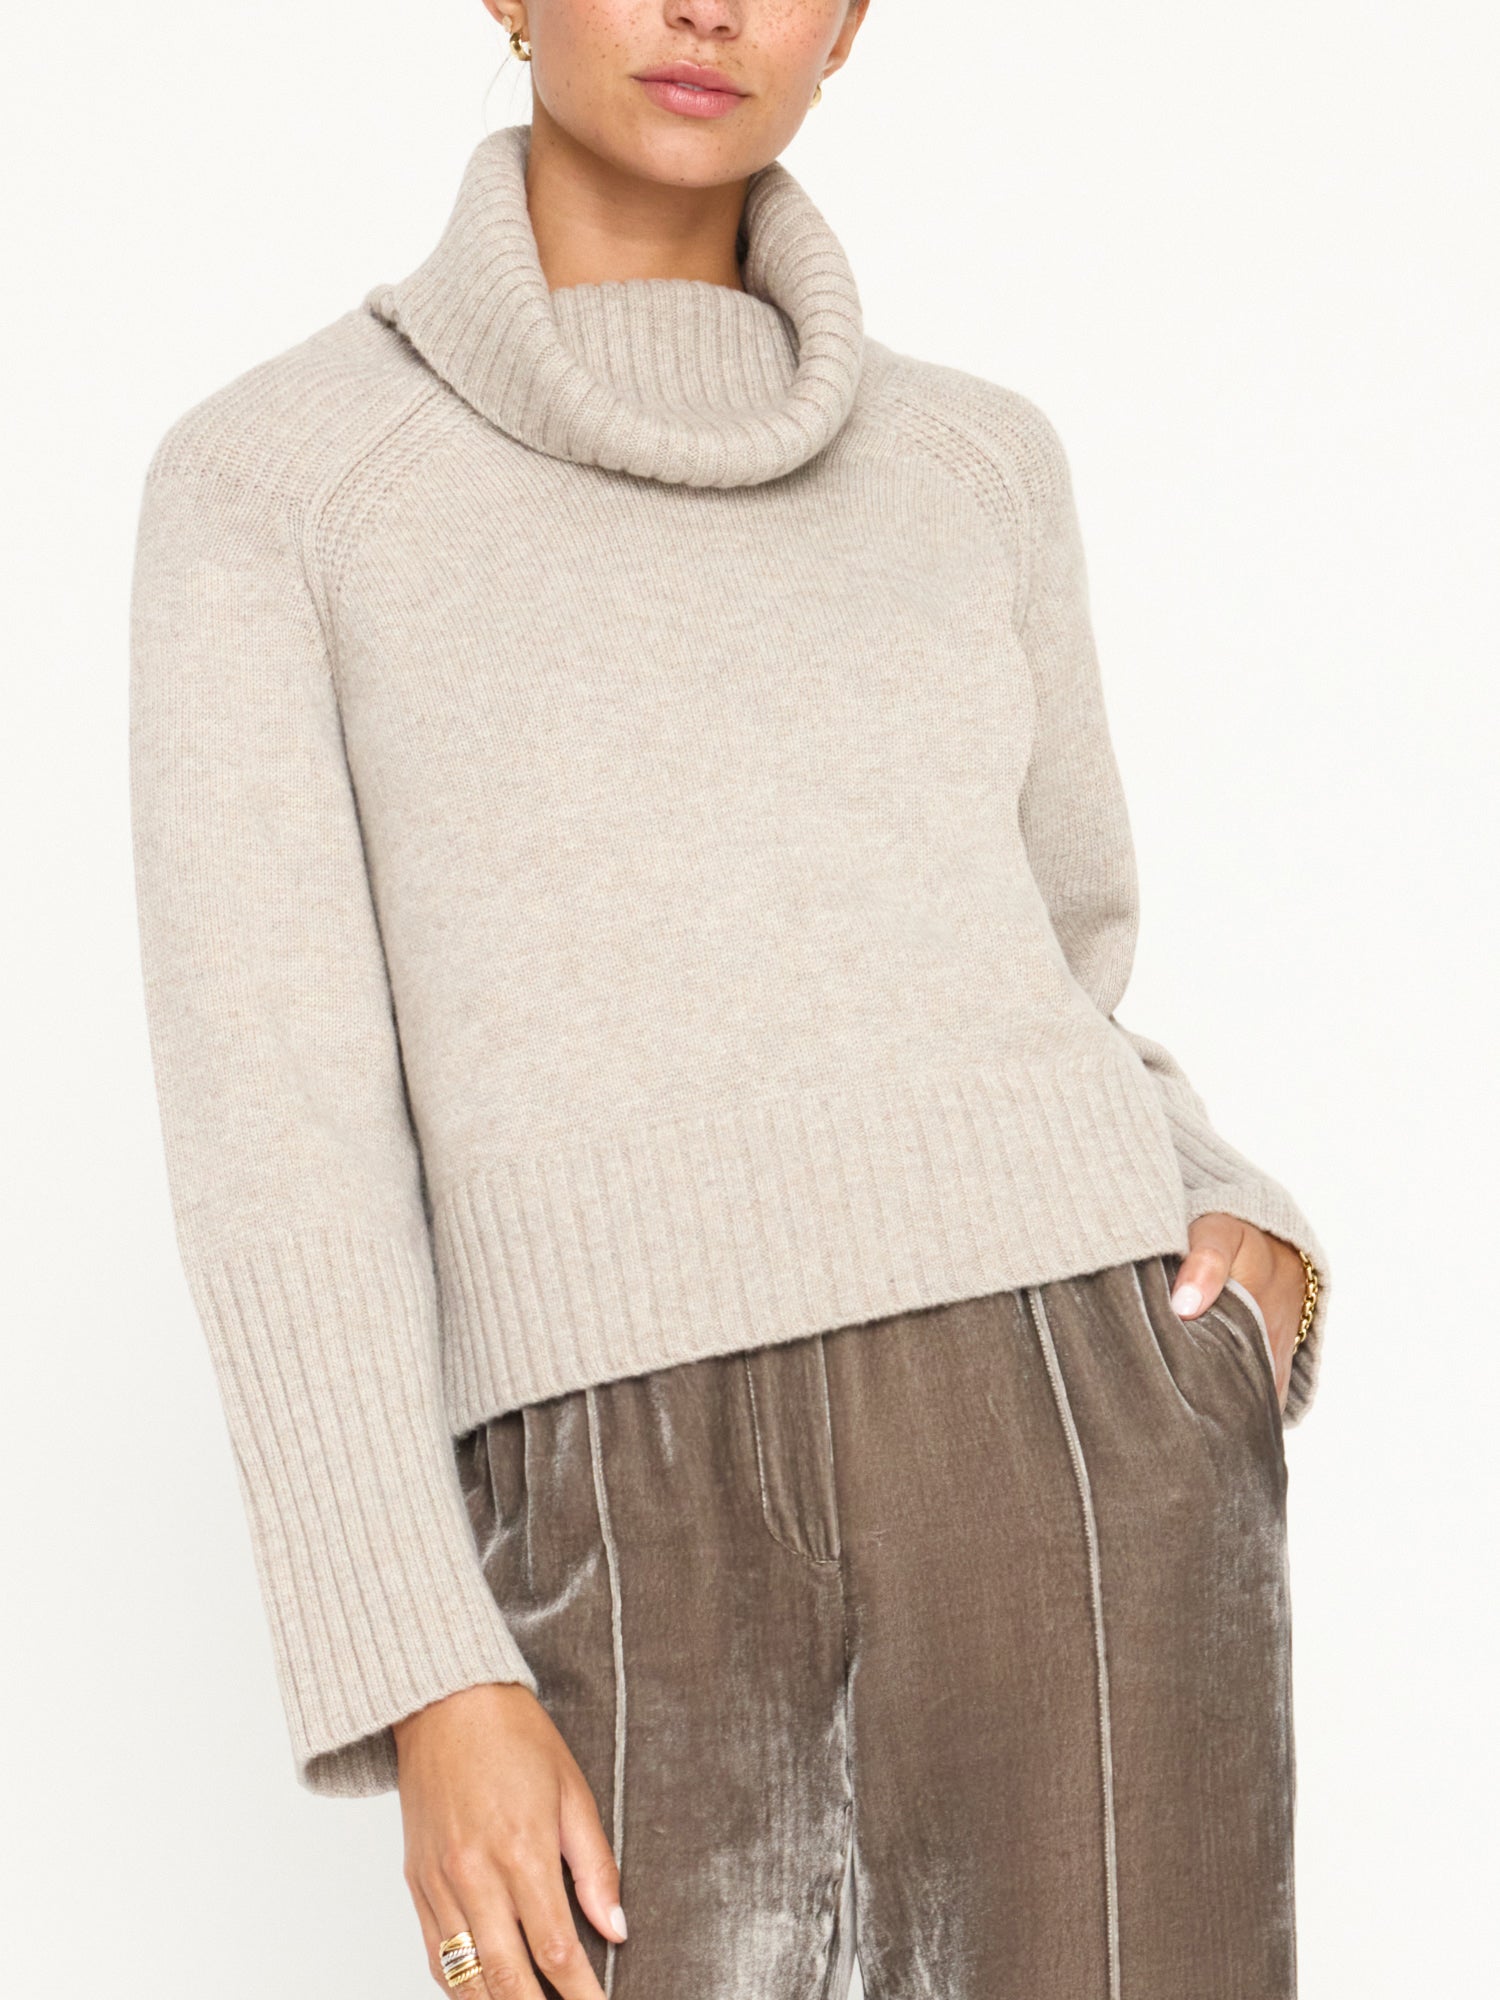 Orion cashmere-wool light grey turtleneck sweater  front view